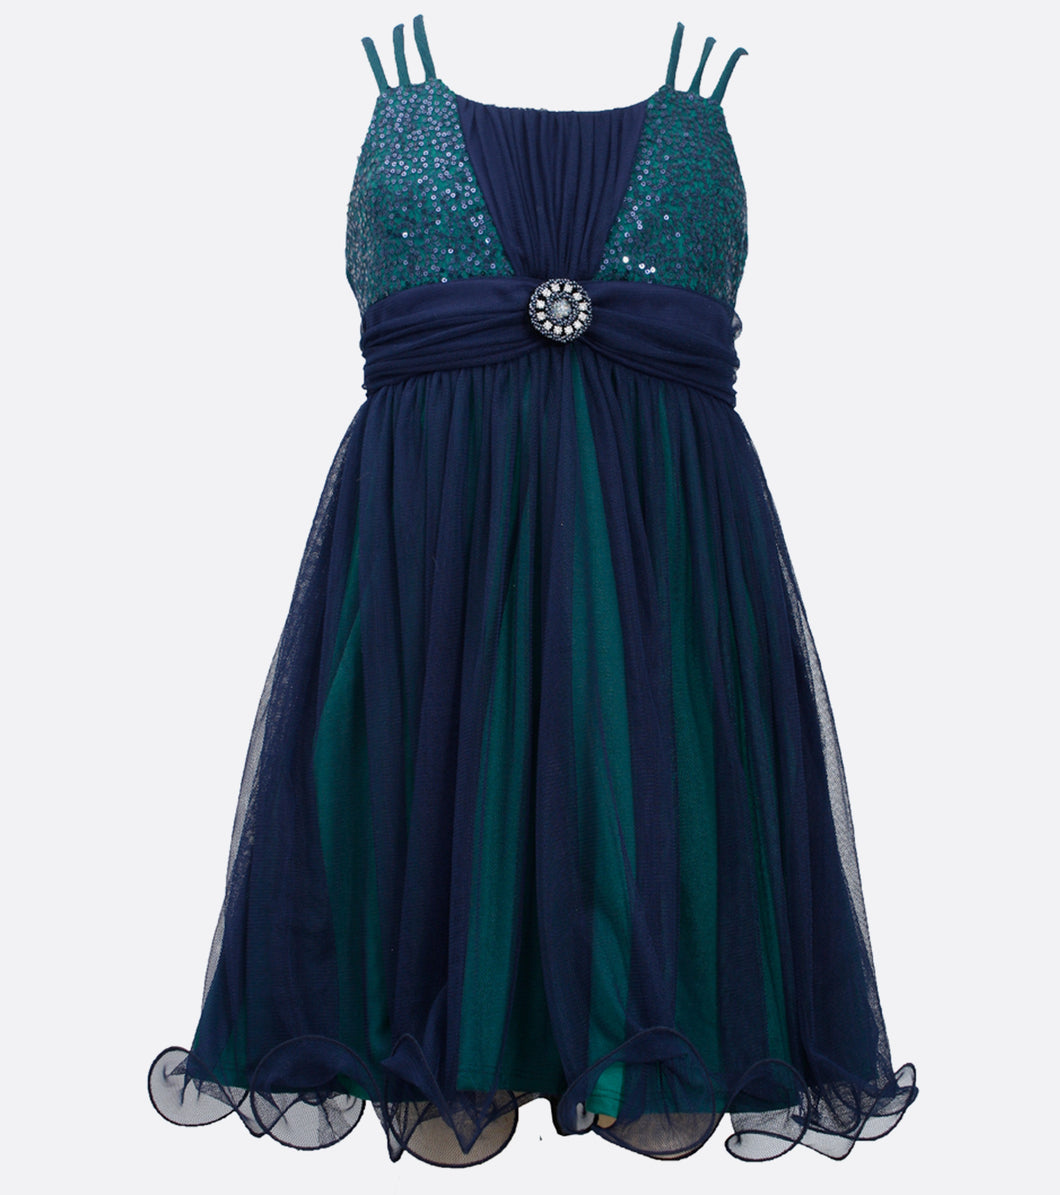 Bonnie Jean navy blue and green party dress